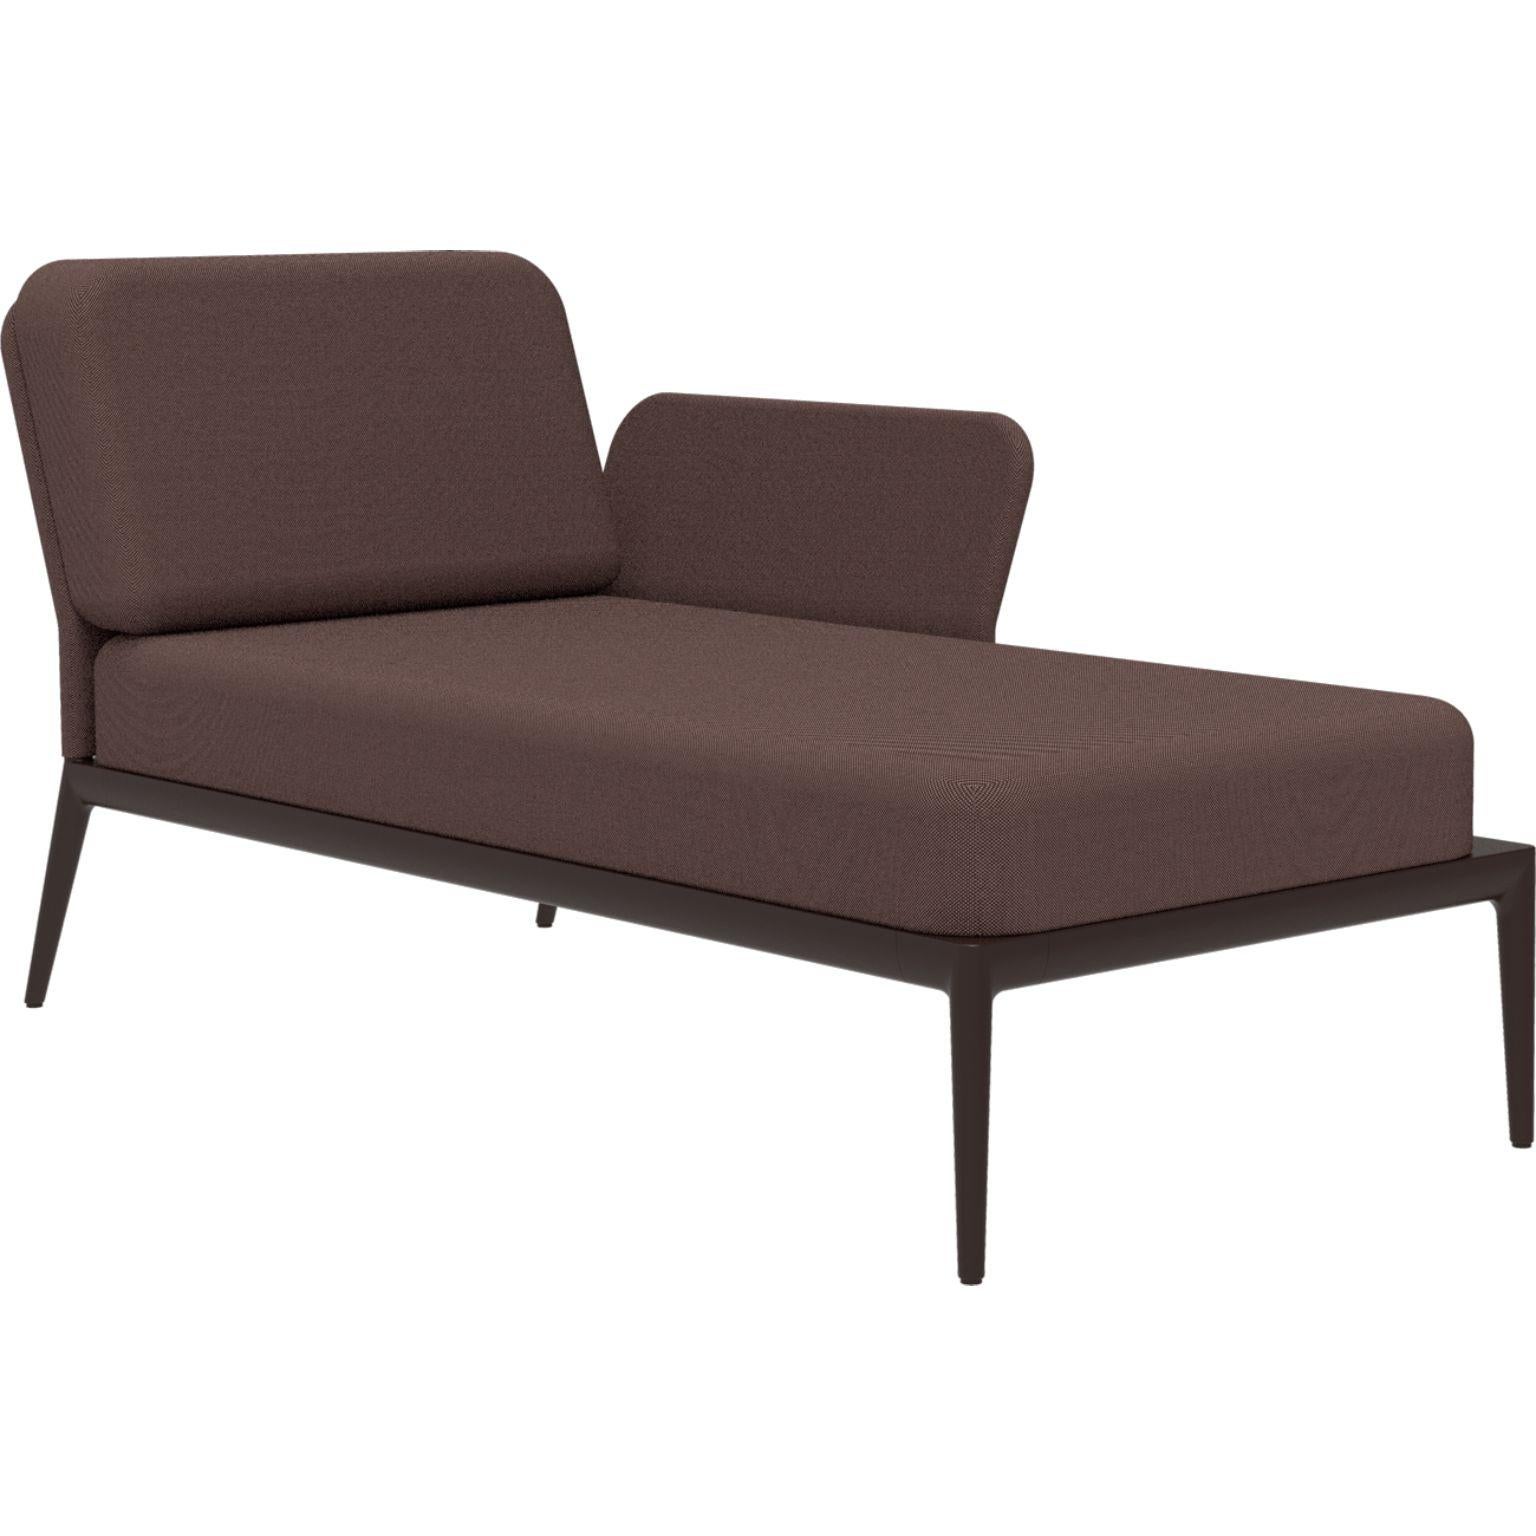 Cover Chocolate Left Chaise Longue by MOWEE
Dimensions: D80 x W155 x H81 cm (seat height 42 cm).
Material: Aluminum and upholstery.
Weight: 28 kg.
Also available in different colors and finishes. Please contact us.

An unmistakable collection